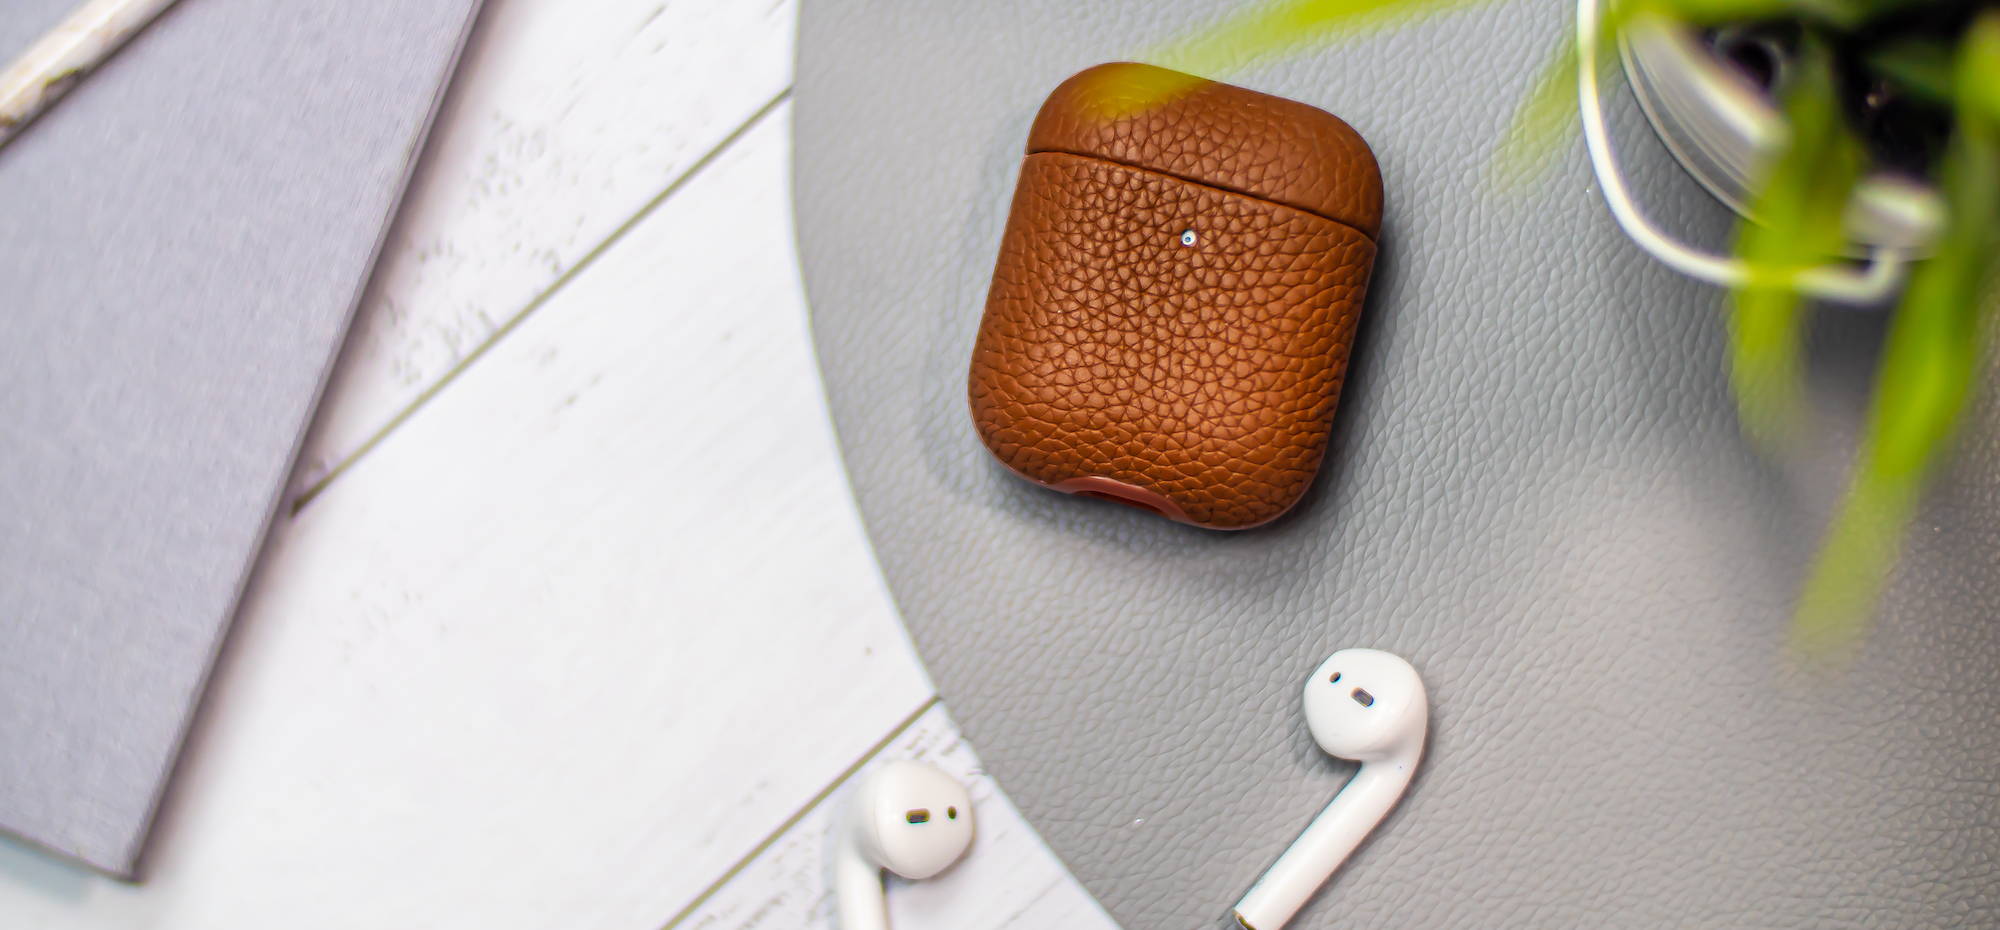 brown genuine leather airpods case flay lay on a grey wooden table top